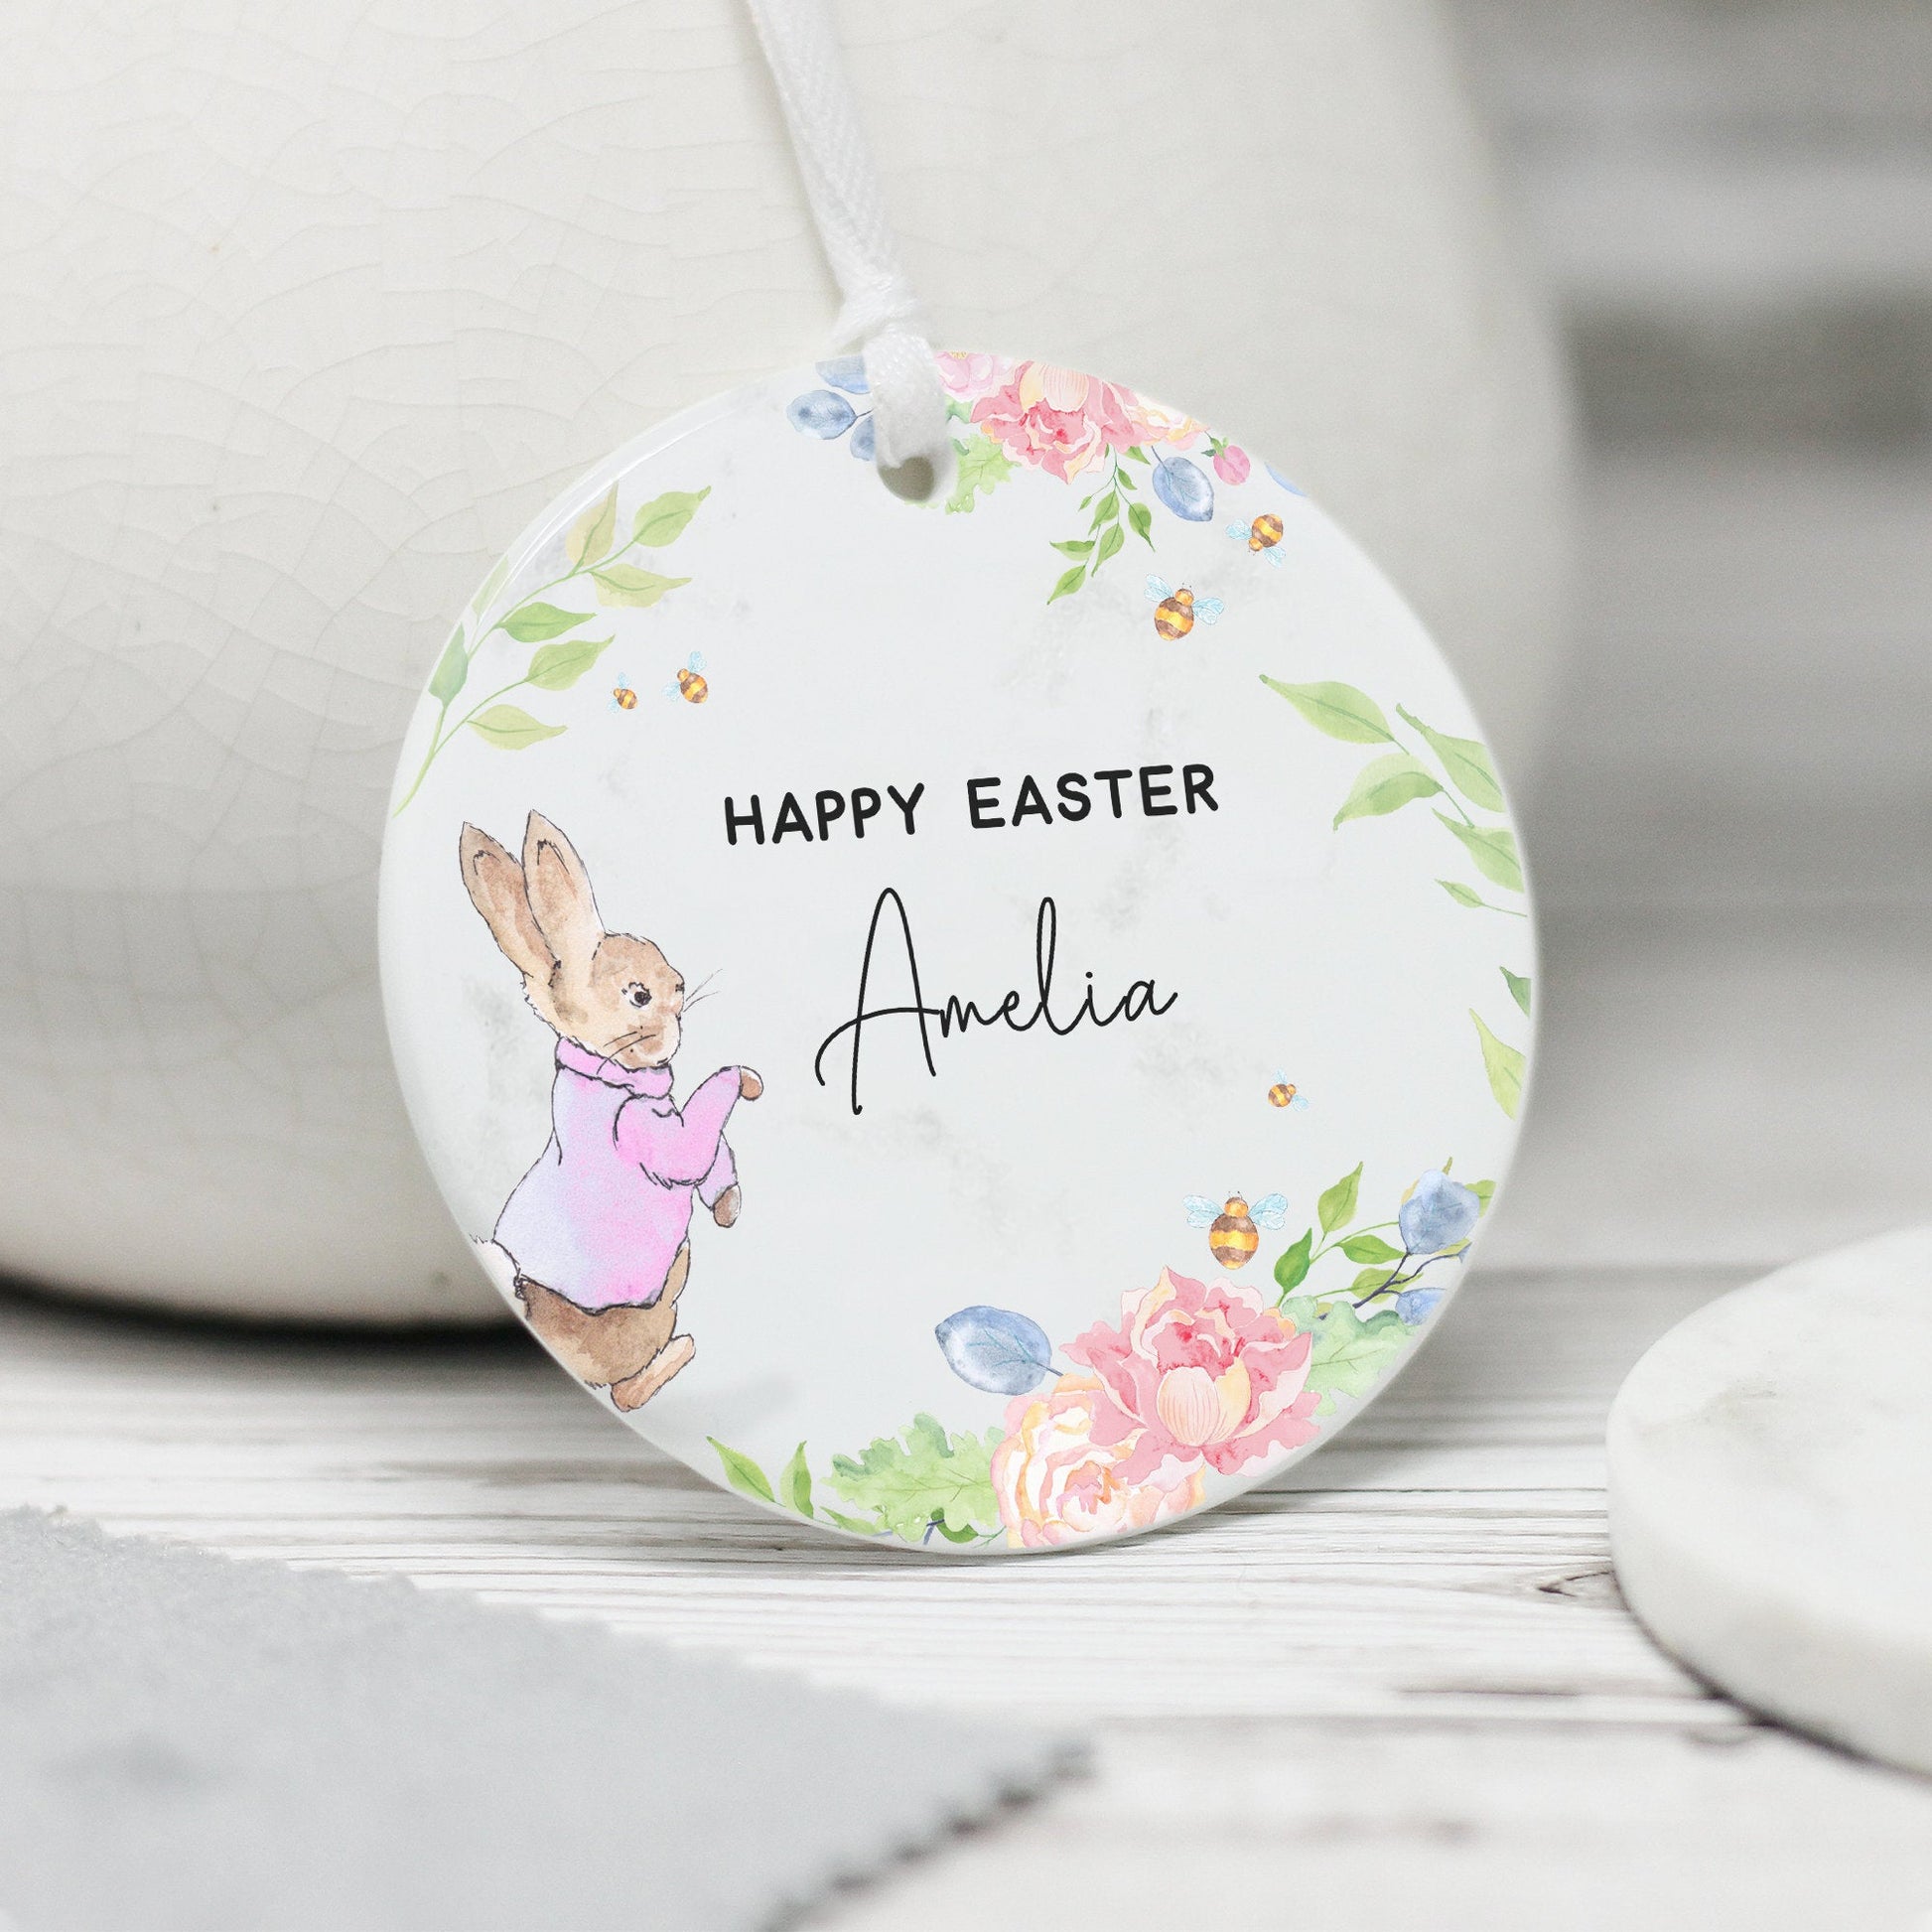 Personalised Baby's 1st Easter Decoration, Bunny Rabbit Easter Decoration Gift - From Willow | Personalised Gifts